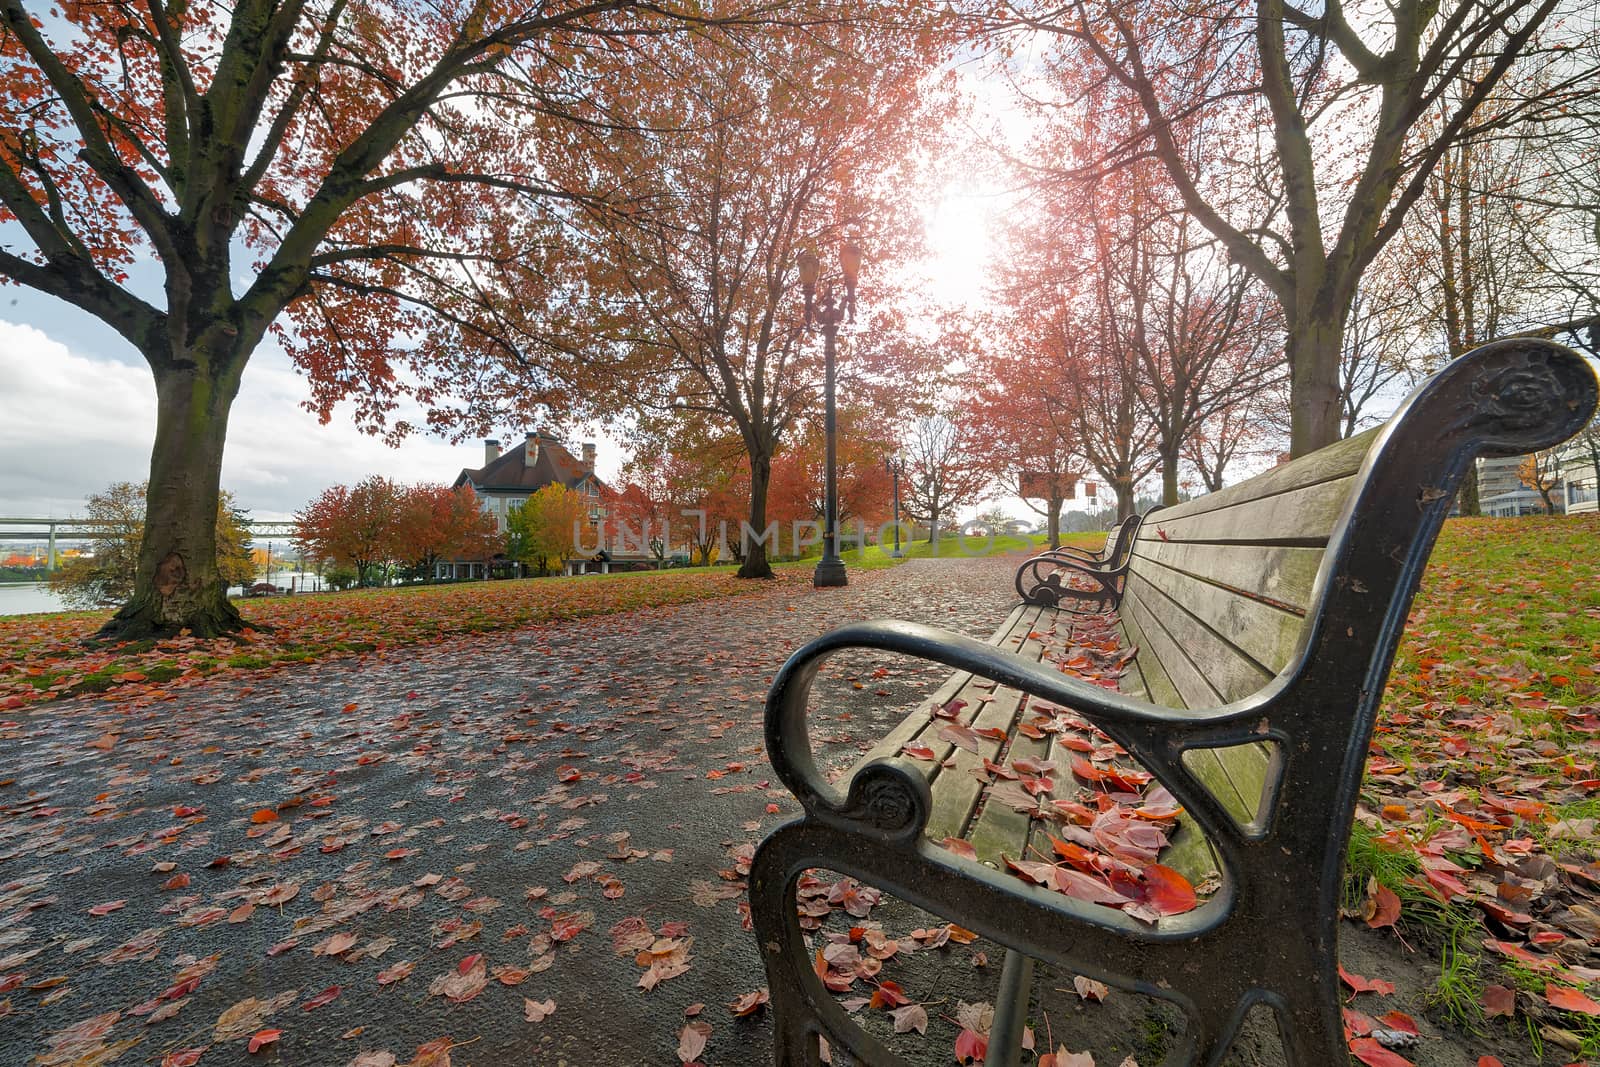 Park Benches in the Park in Autumn by jpldesigns